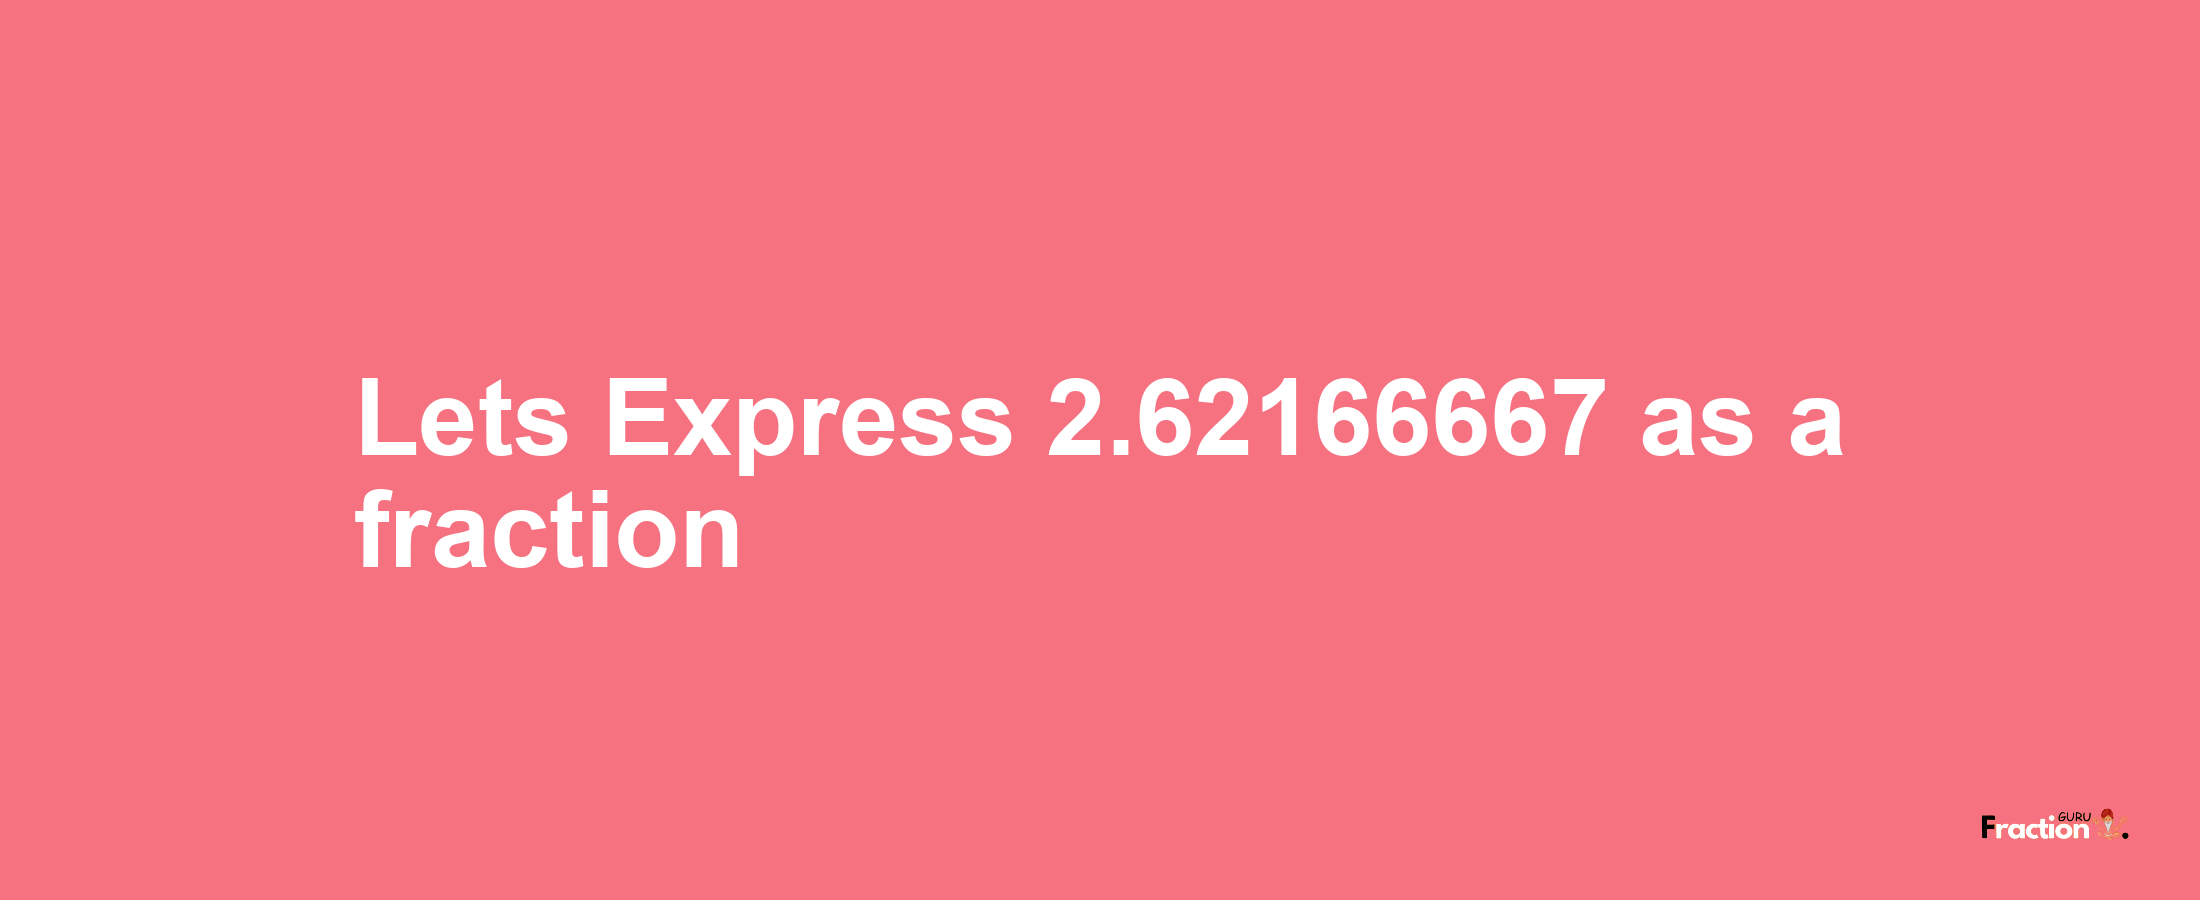 Lets Express 2.62166667 as afraction